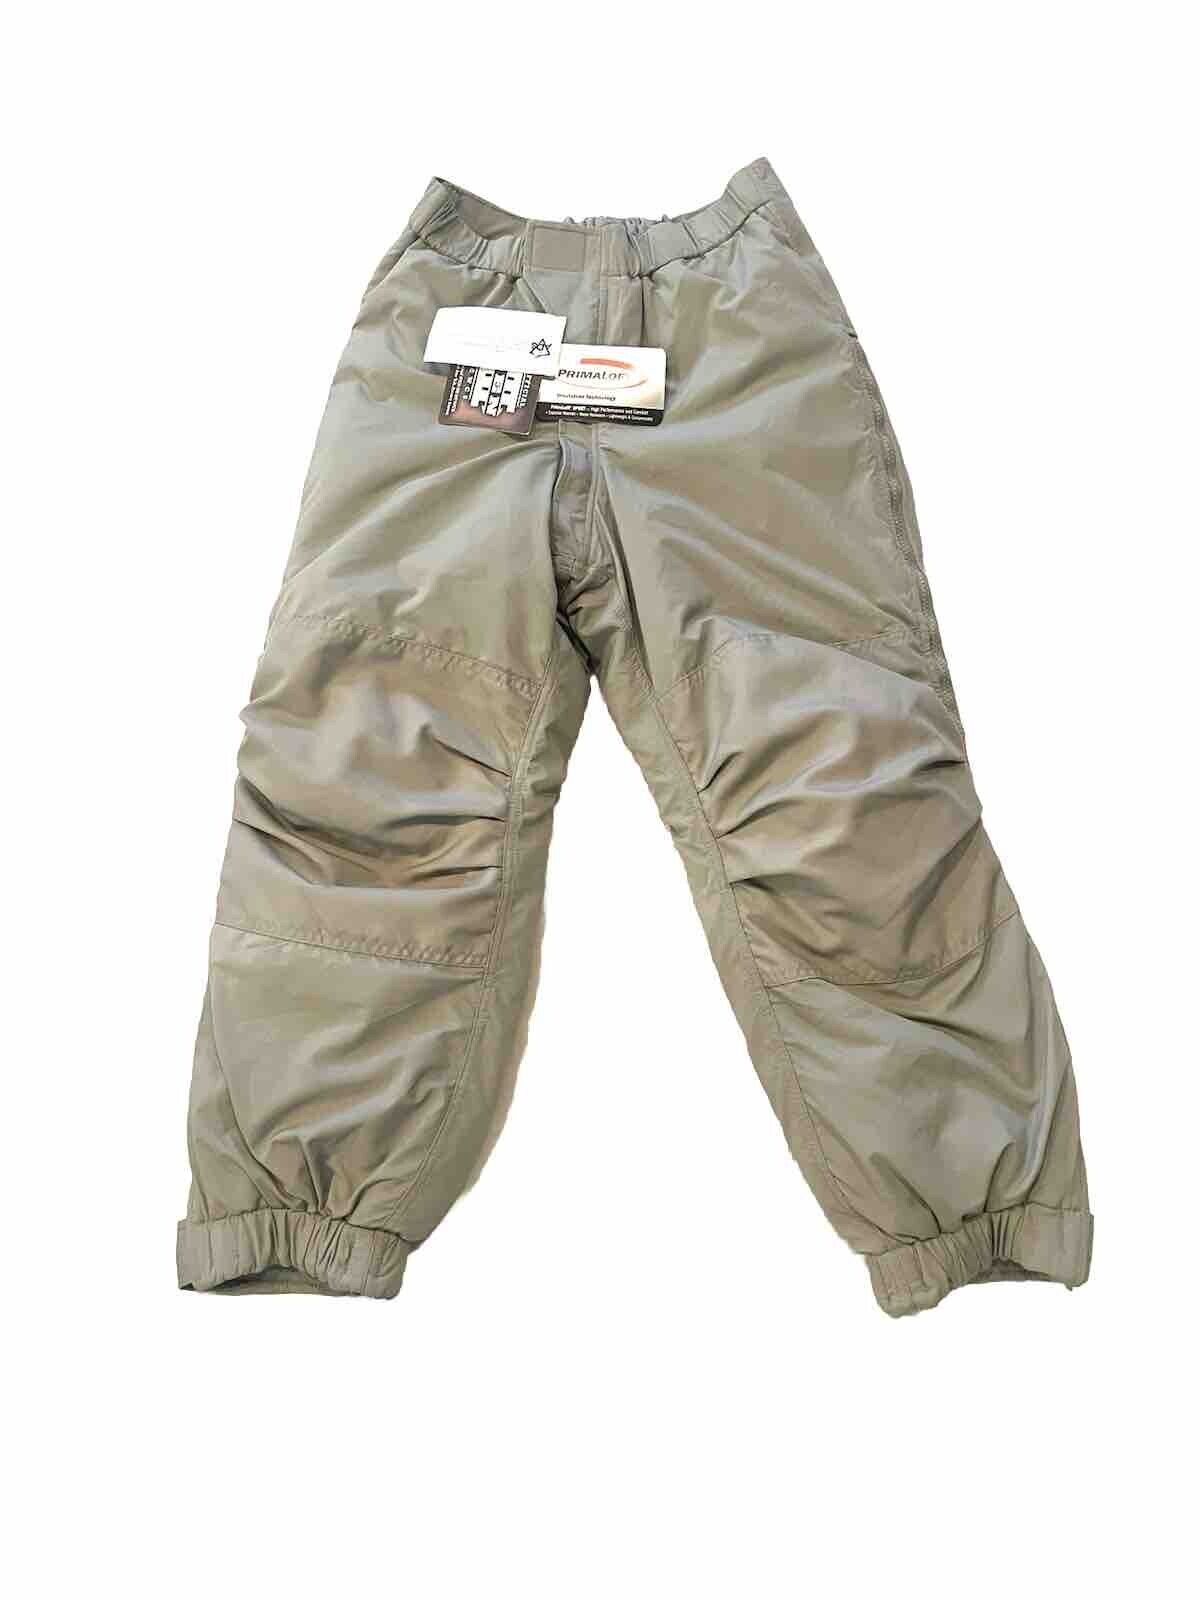 Primaloft Gen III Extreme Weather Military Pants Grey Size Small Short